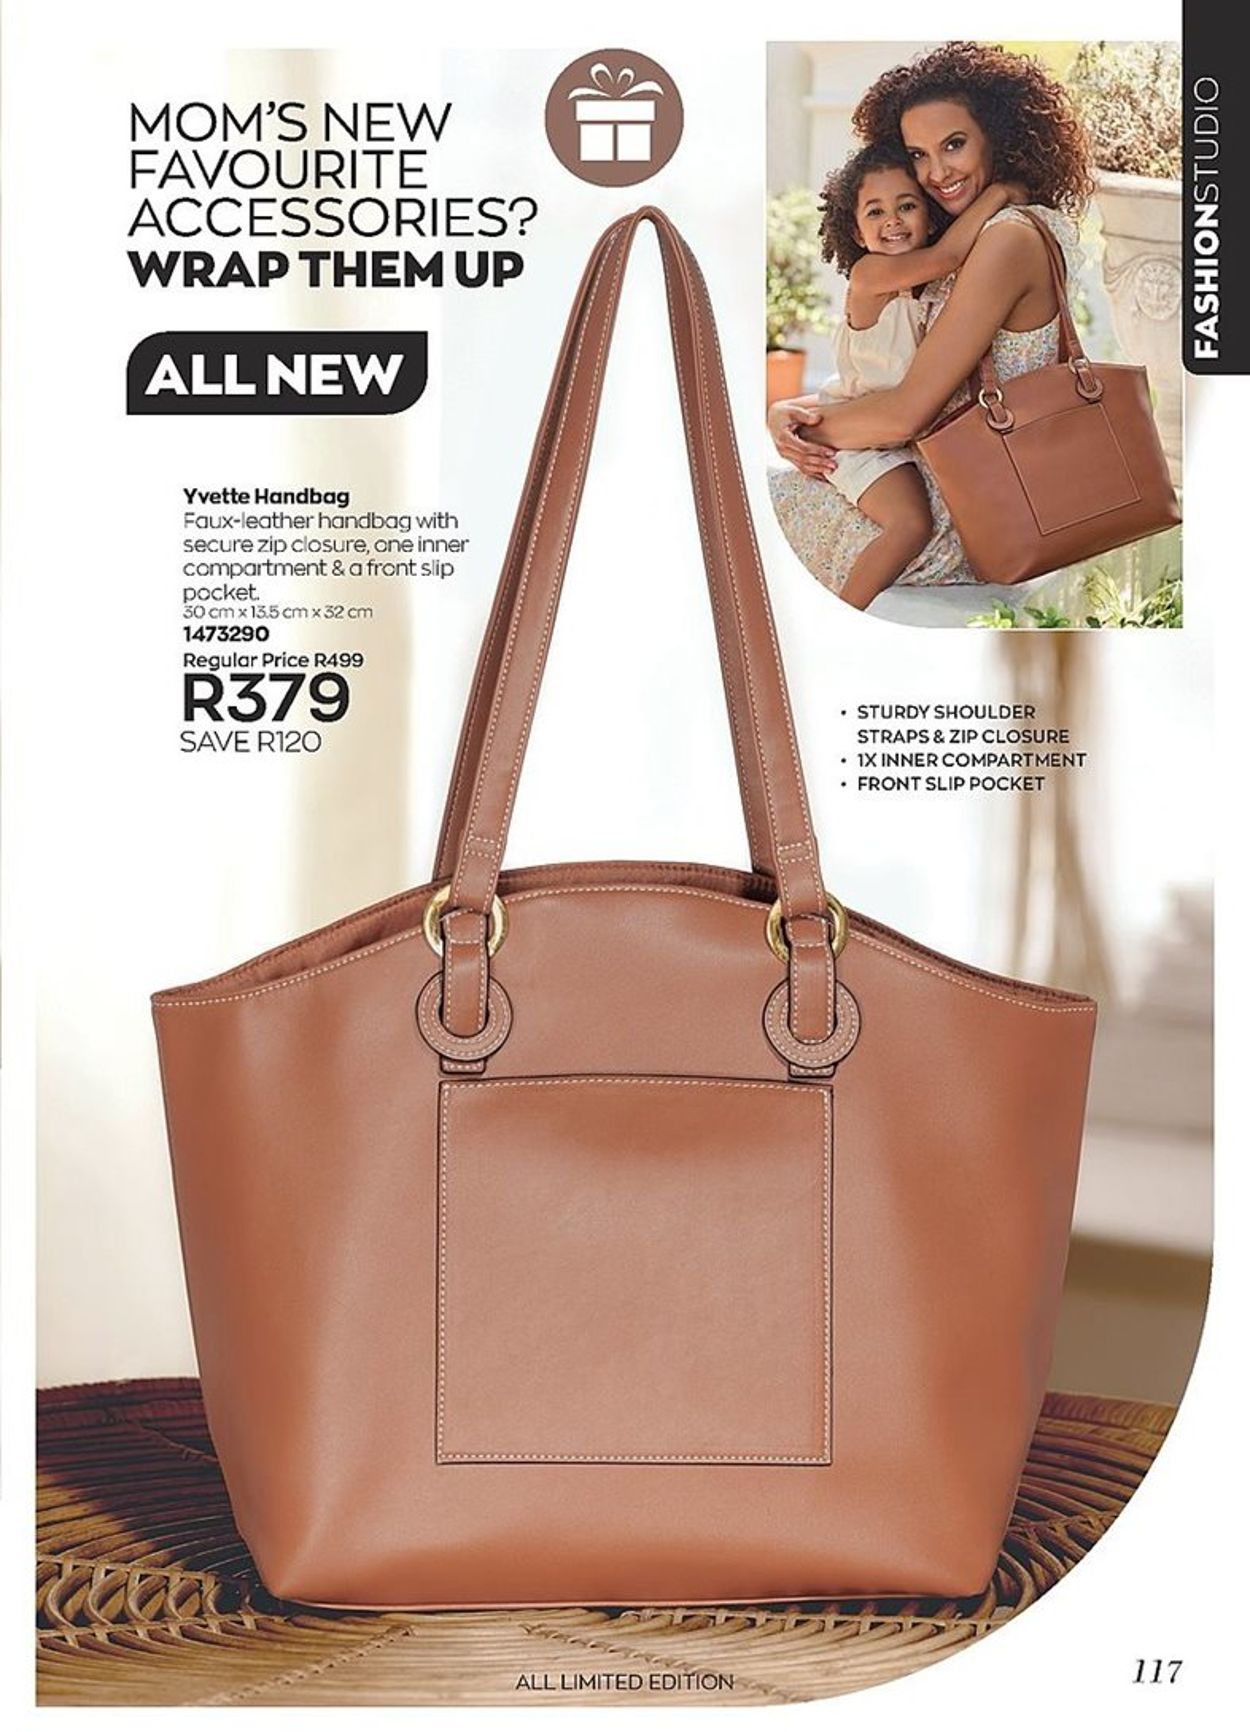 Avon Malaysia - It has been an AWESOME OCTOBER so far and we're making it  even better! Win the Riviera Overnighter Bag for FREE when you purchase a  minimum of RM1500 WM /